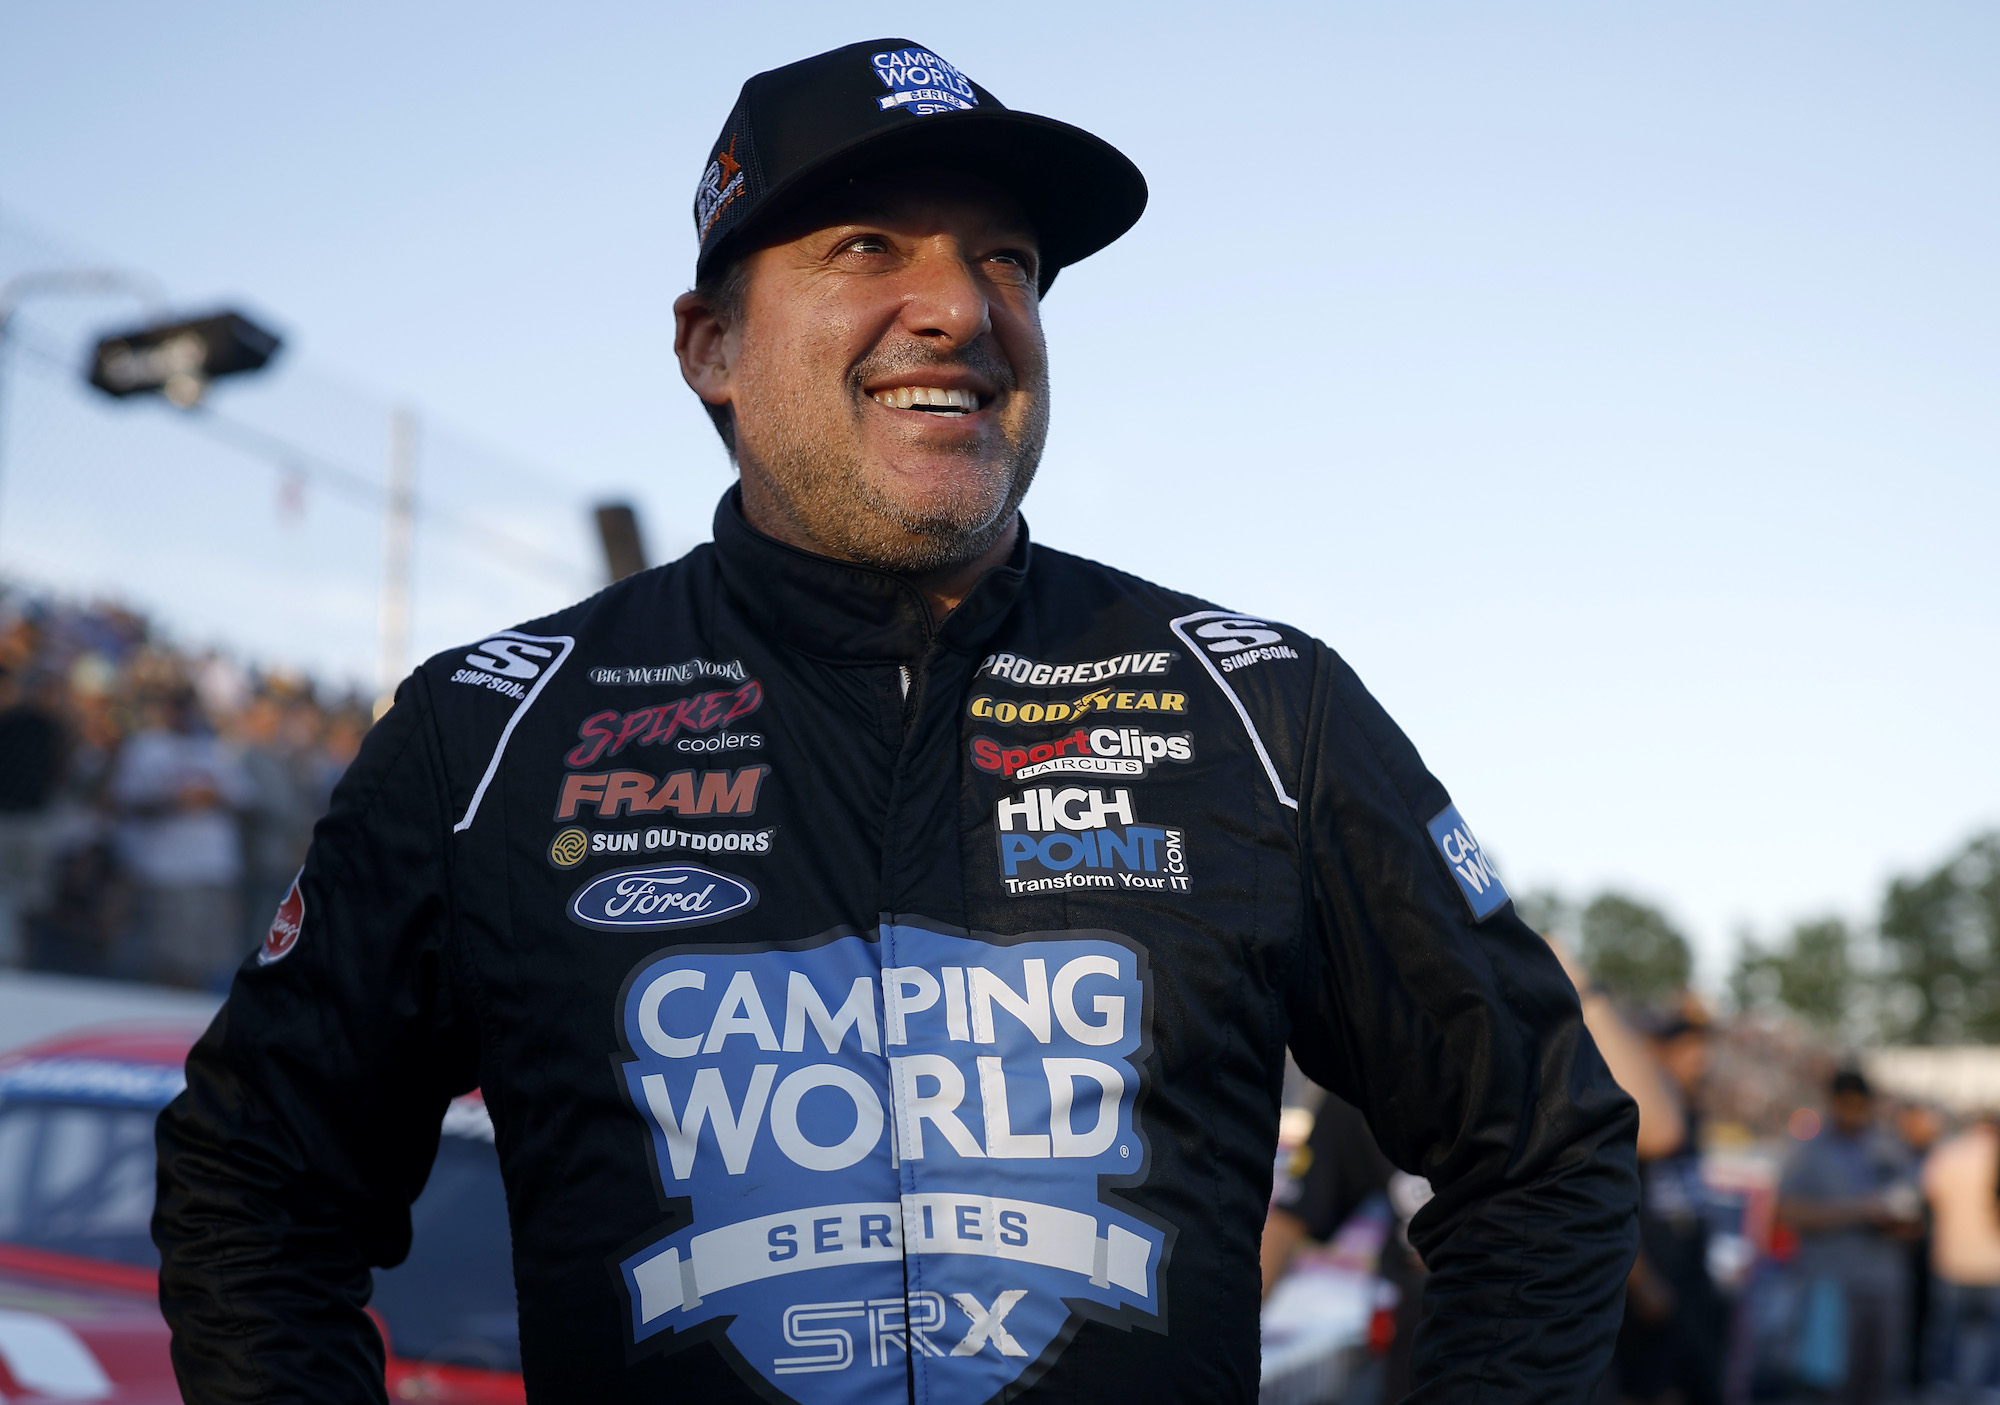 The Driver Who an Angry Tony Stewart Berated on National Television a Few Weeks Ago Returns to SRX This Weekend